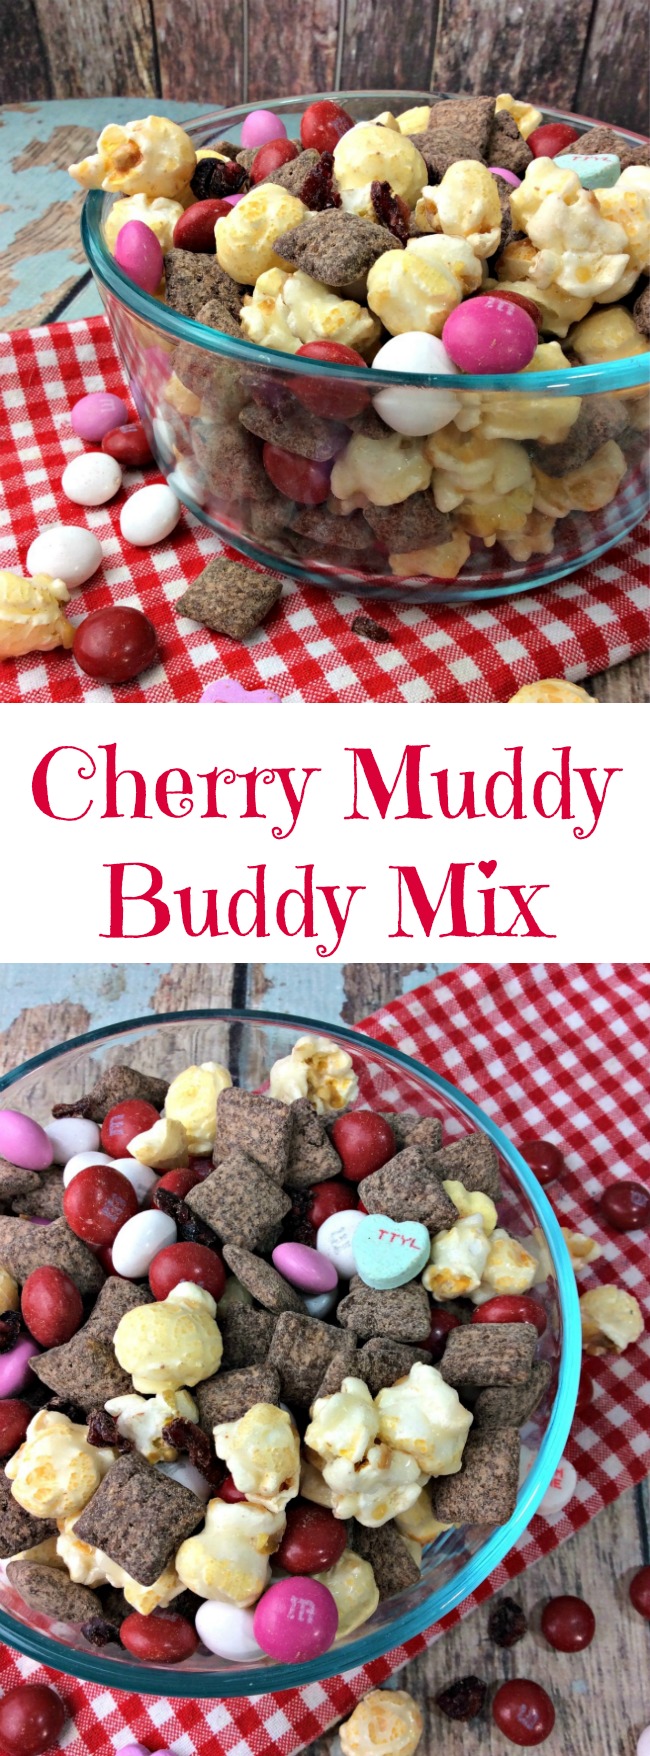 Here we have another easy Valentine's Day Treat with a Cherry Muddy Buddy Mix Recipe. If you can't tell by now...I love easy recipes.